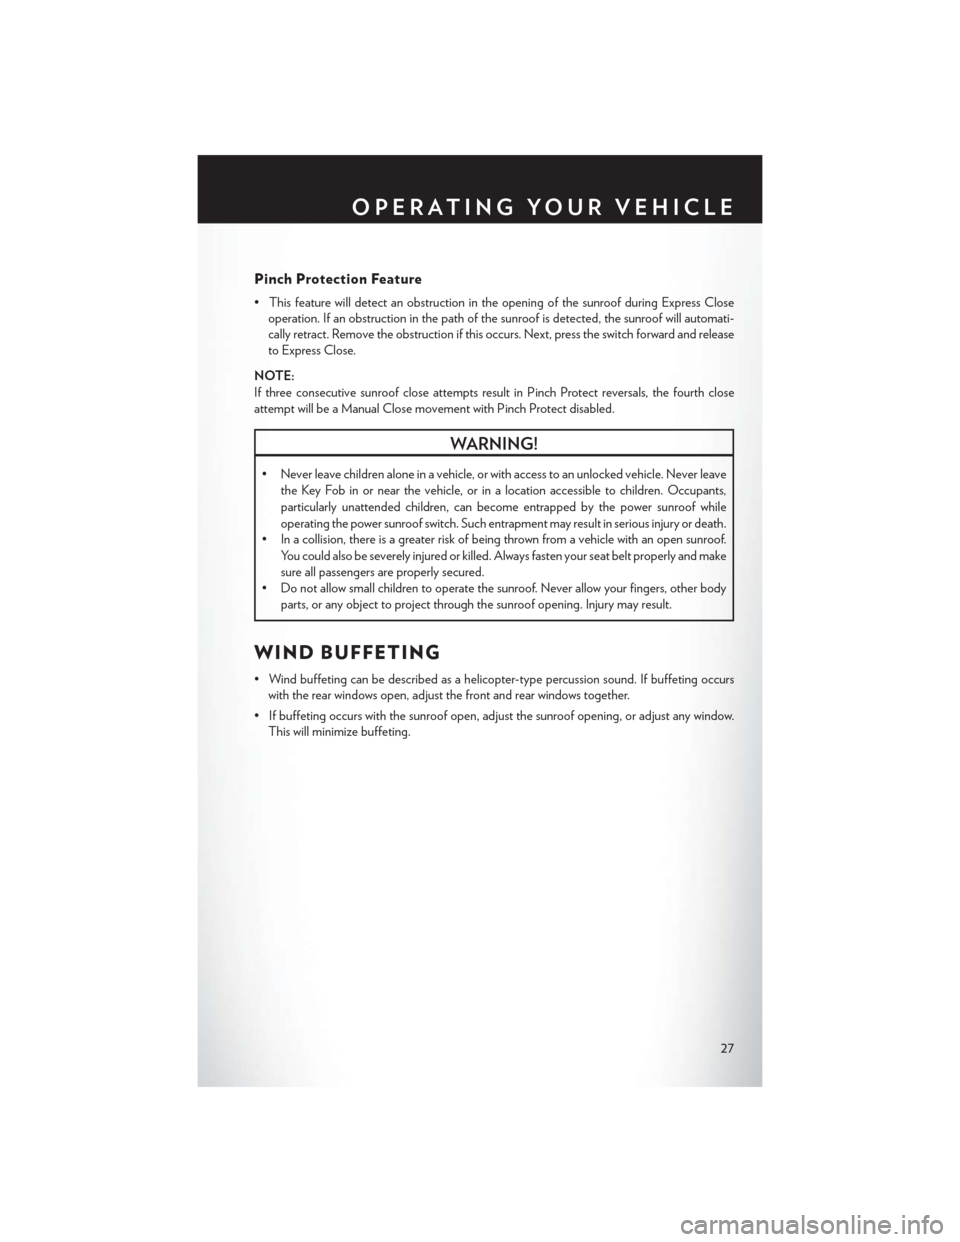 CHRYSLER 200 2014 1.G Owners Manual Pinch Protection Feature
• This feature will detect an obstruction in the opening of the sunroof during Express Closeoperation. If an obstruction in the path of the sunroof is detected, the sunroof 